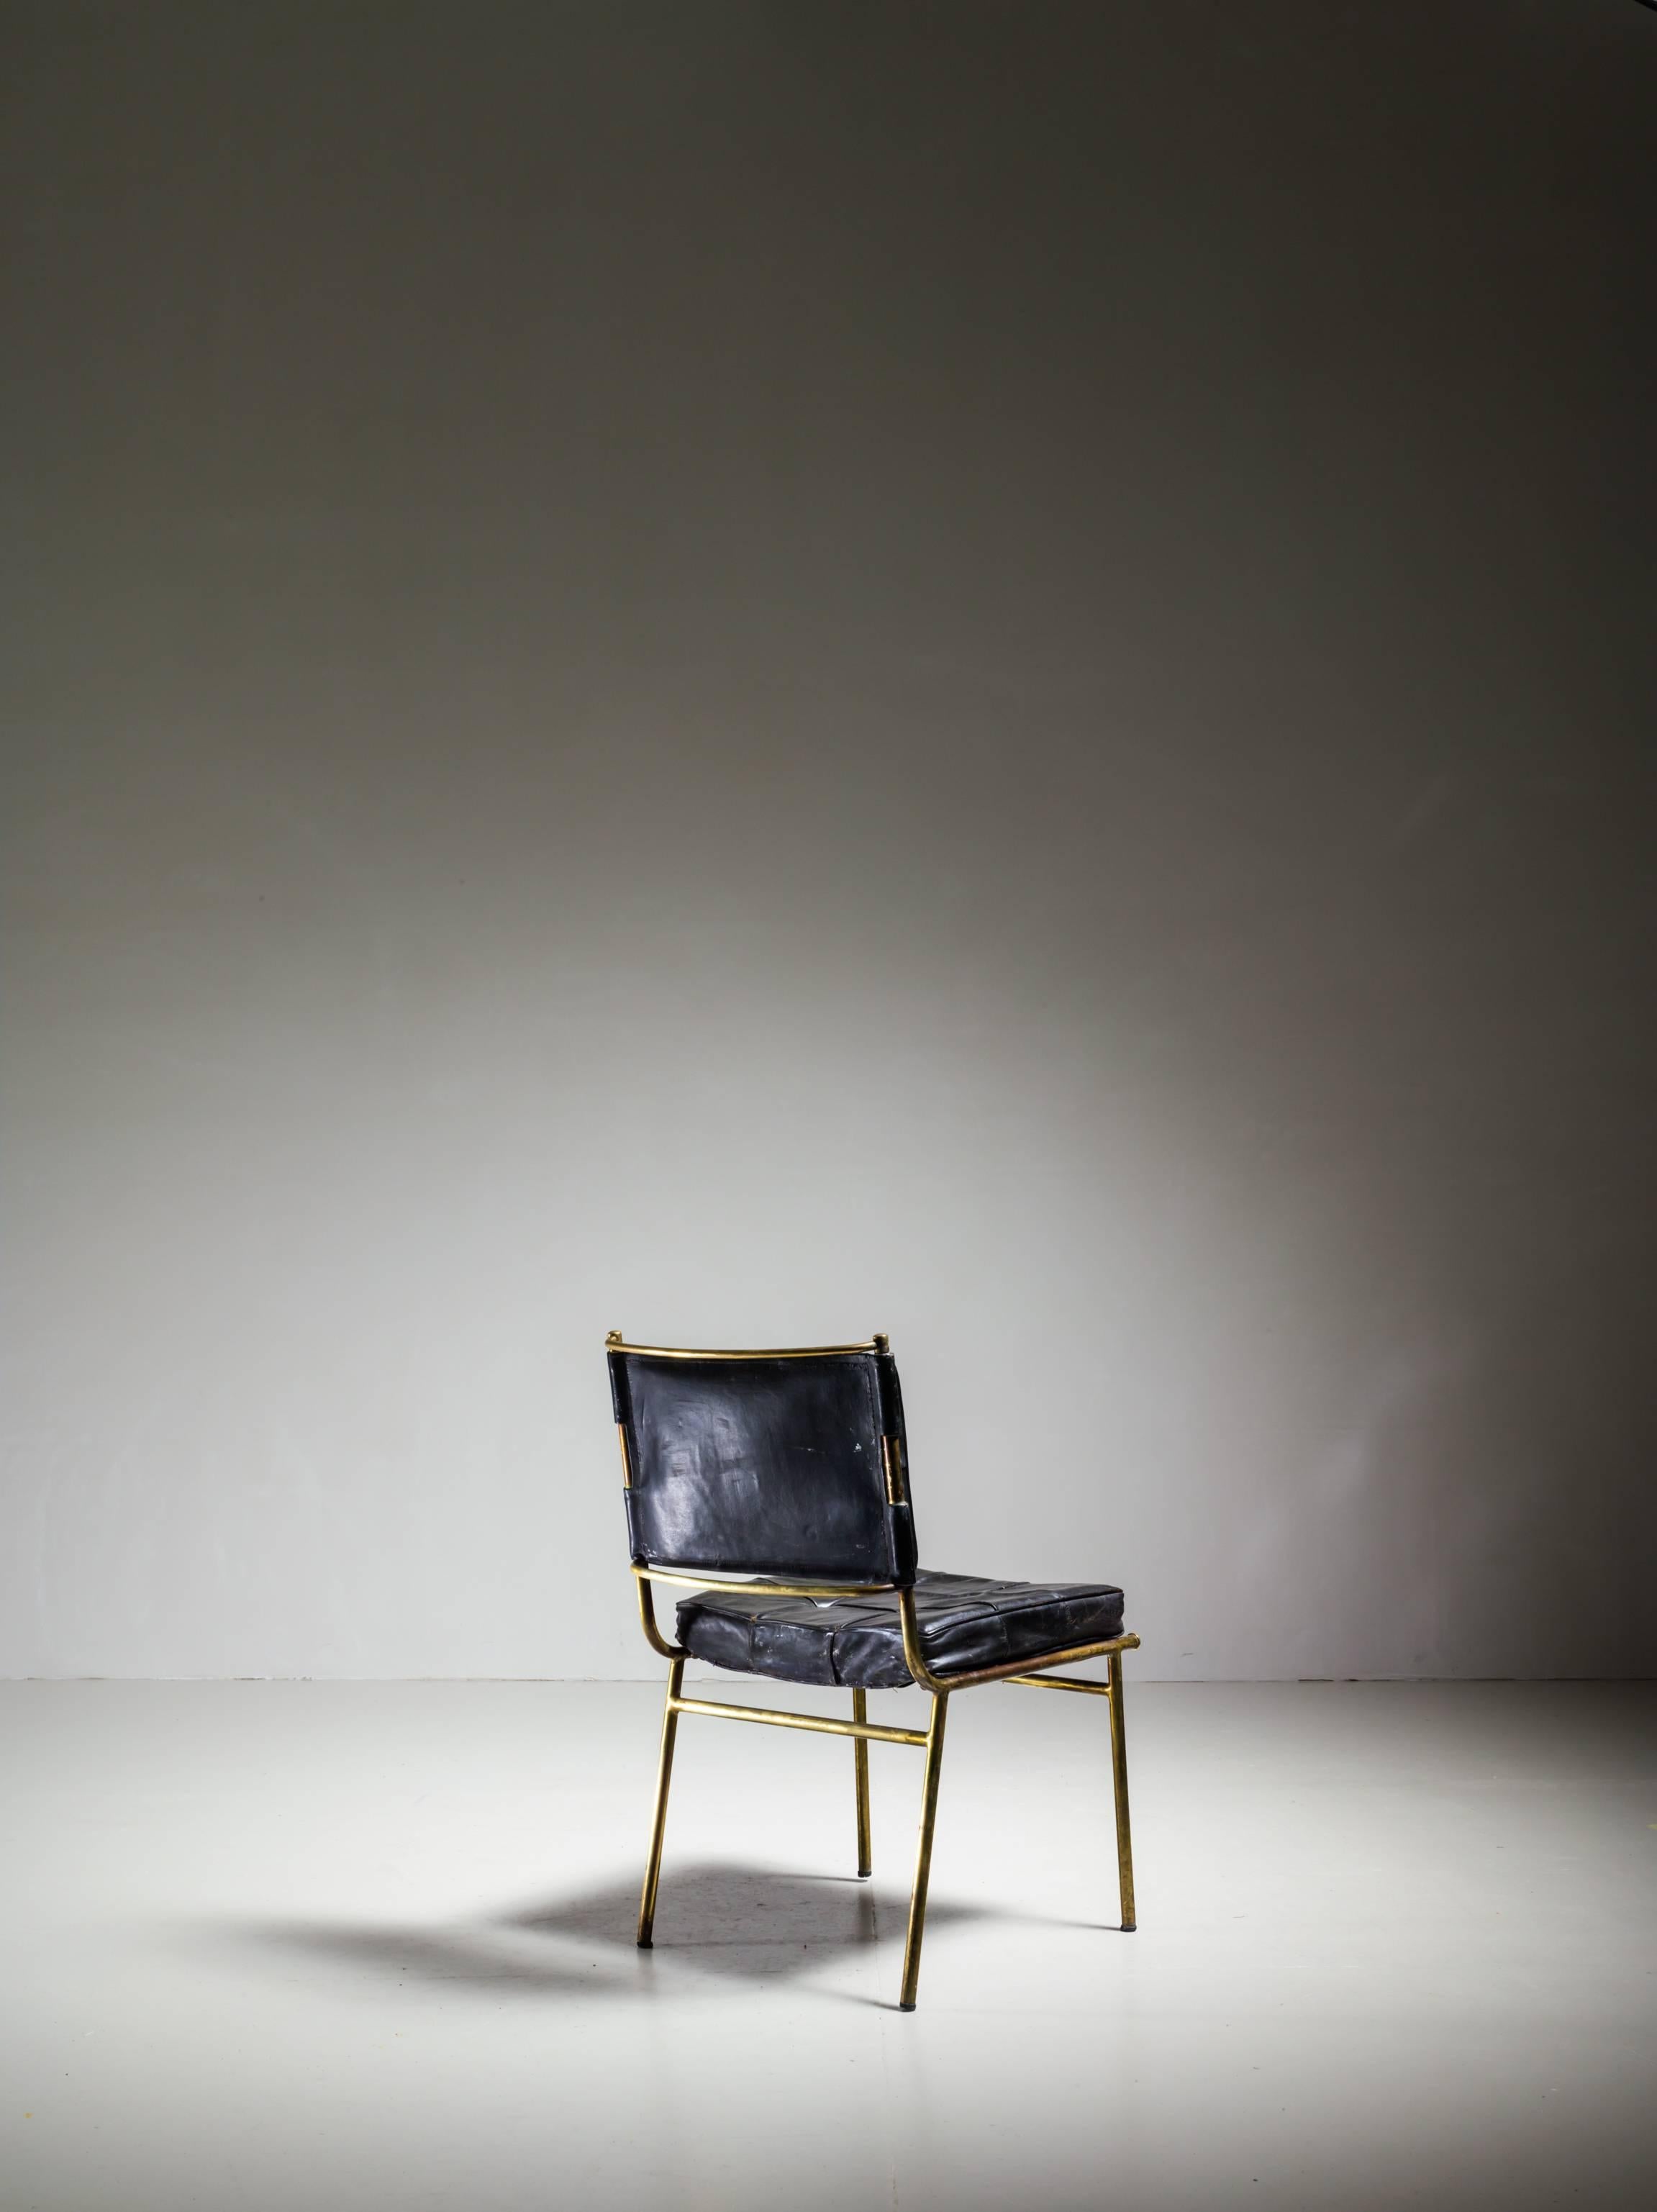 A rare and published Mathieu Matégot chair from the 1950s. The chair is made of a brass frame with a black padded leather cushion and backrest. The backrest tilts back slightly, for a comfortable seating position. At the top, the frame has a curved